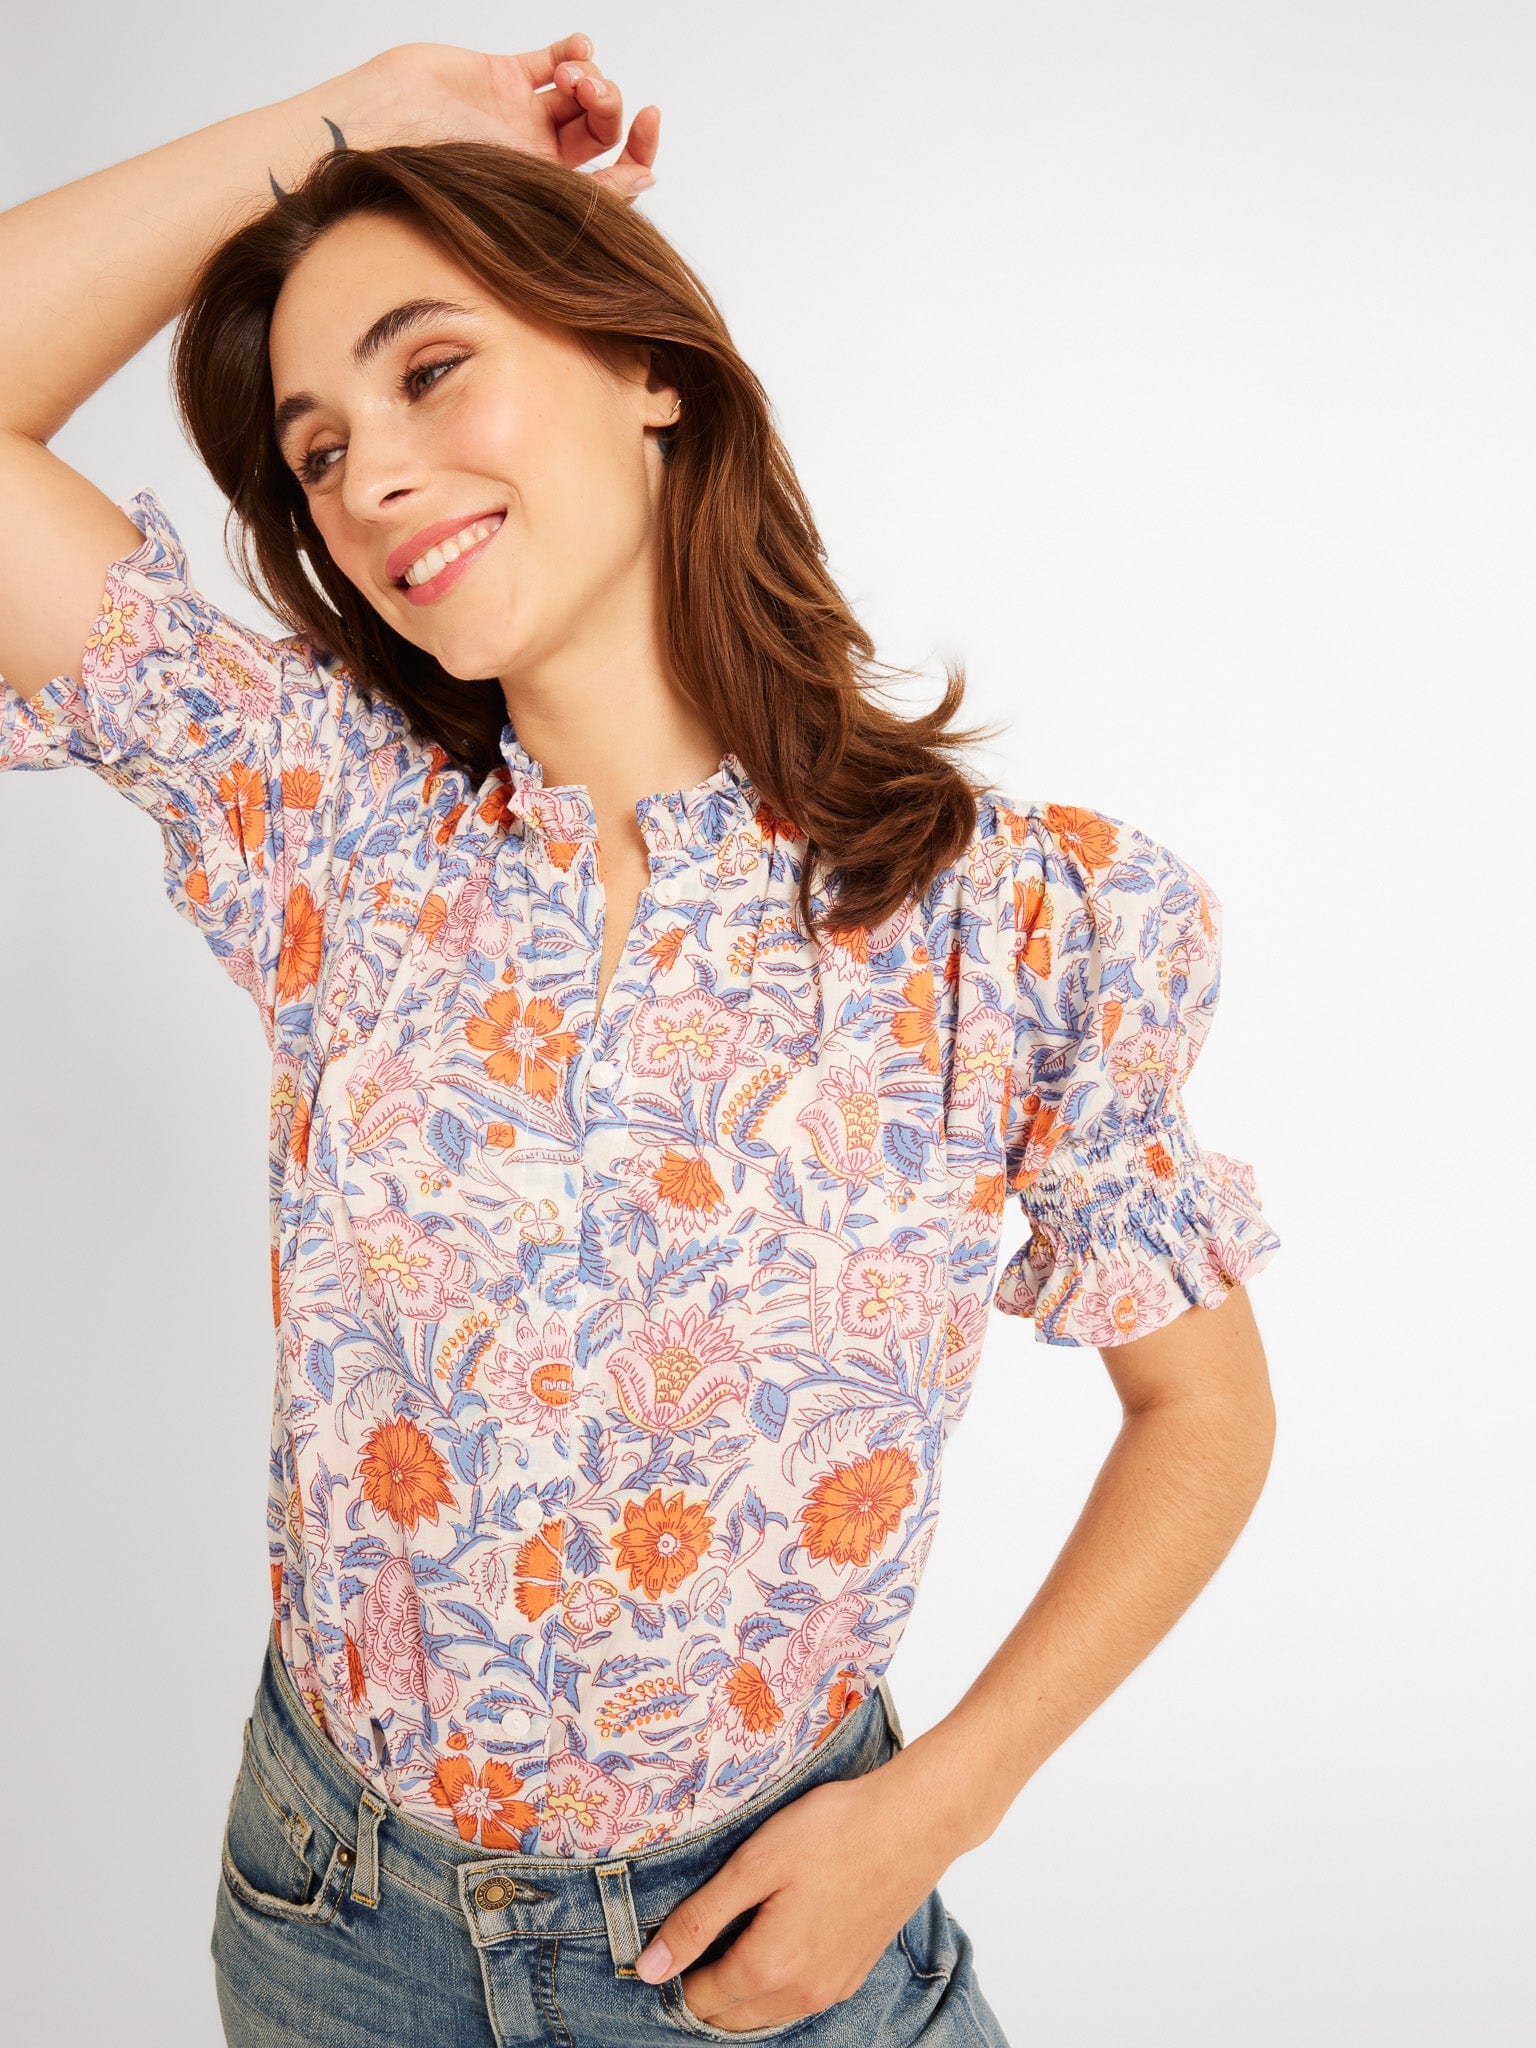 MILLE Clothing Marnie Top in Newport Floral